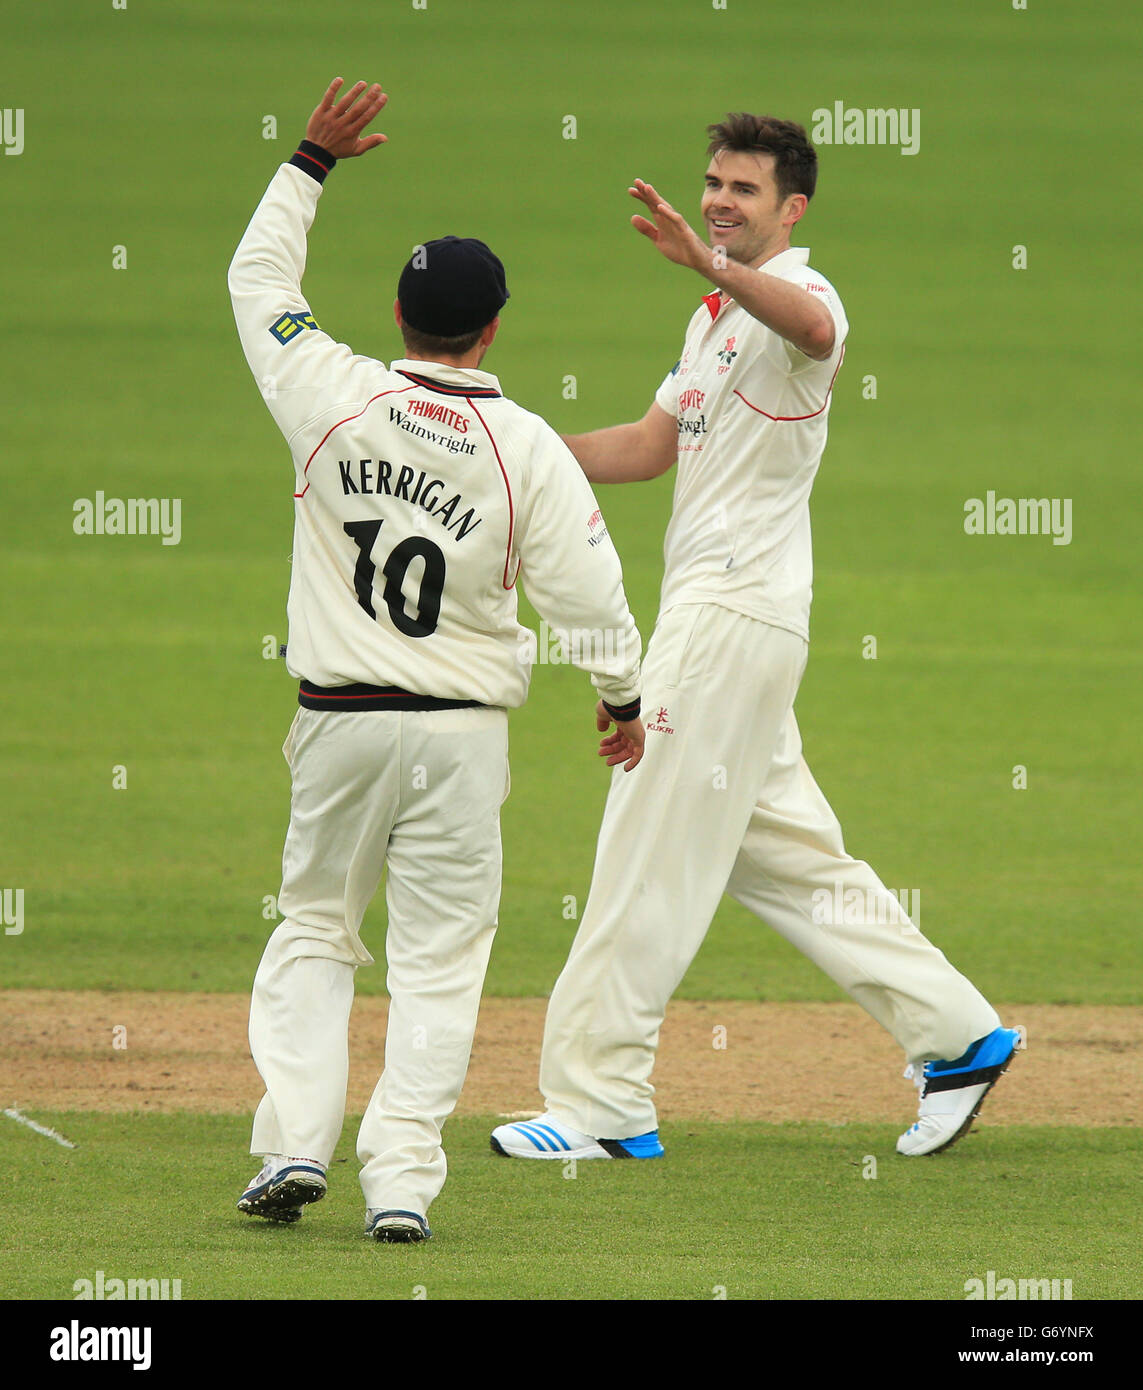 Lancashire's James Anderson celebrates the wicket of Nottinghamshire's Michael Lumb during the LV=County Championship, Division One match at Trent Bridge, Nottingham. Stock Photo